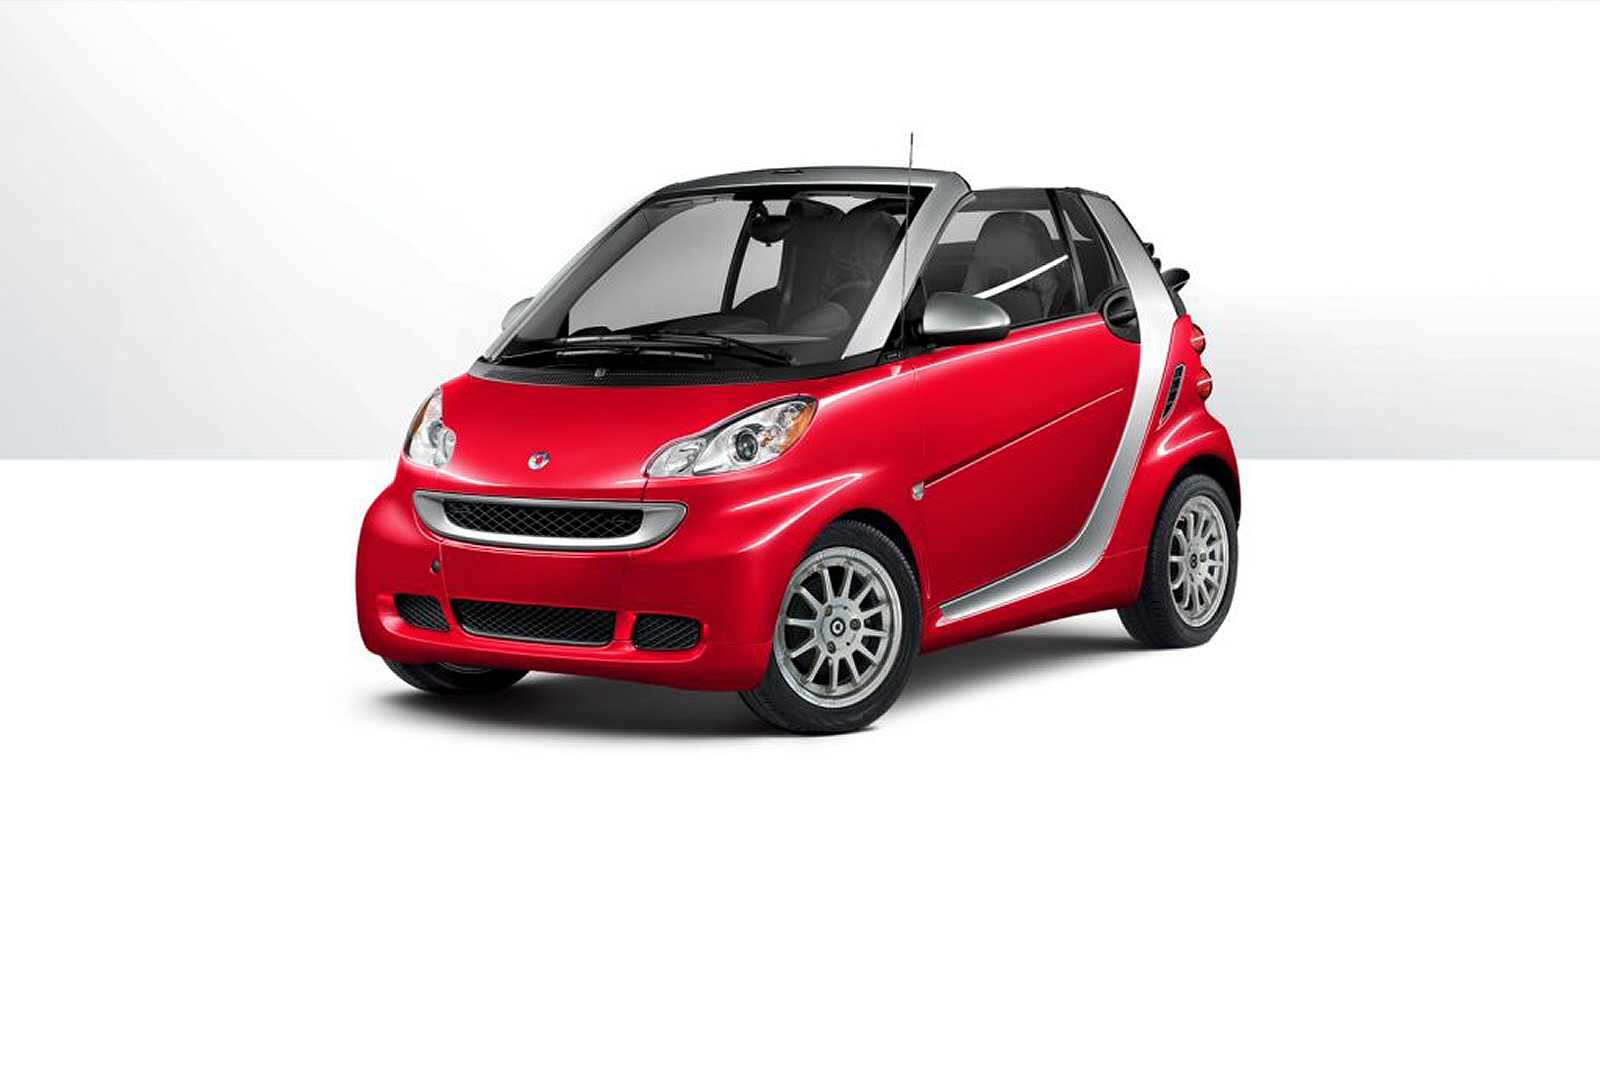 2014 smart fortwo cabrio front view